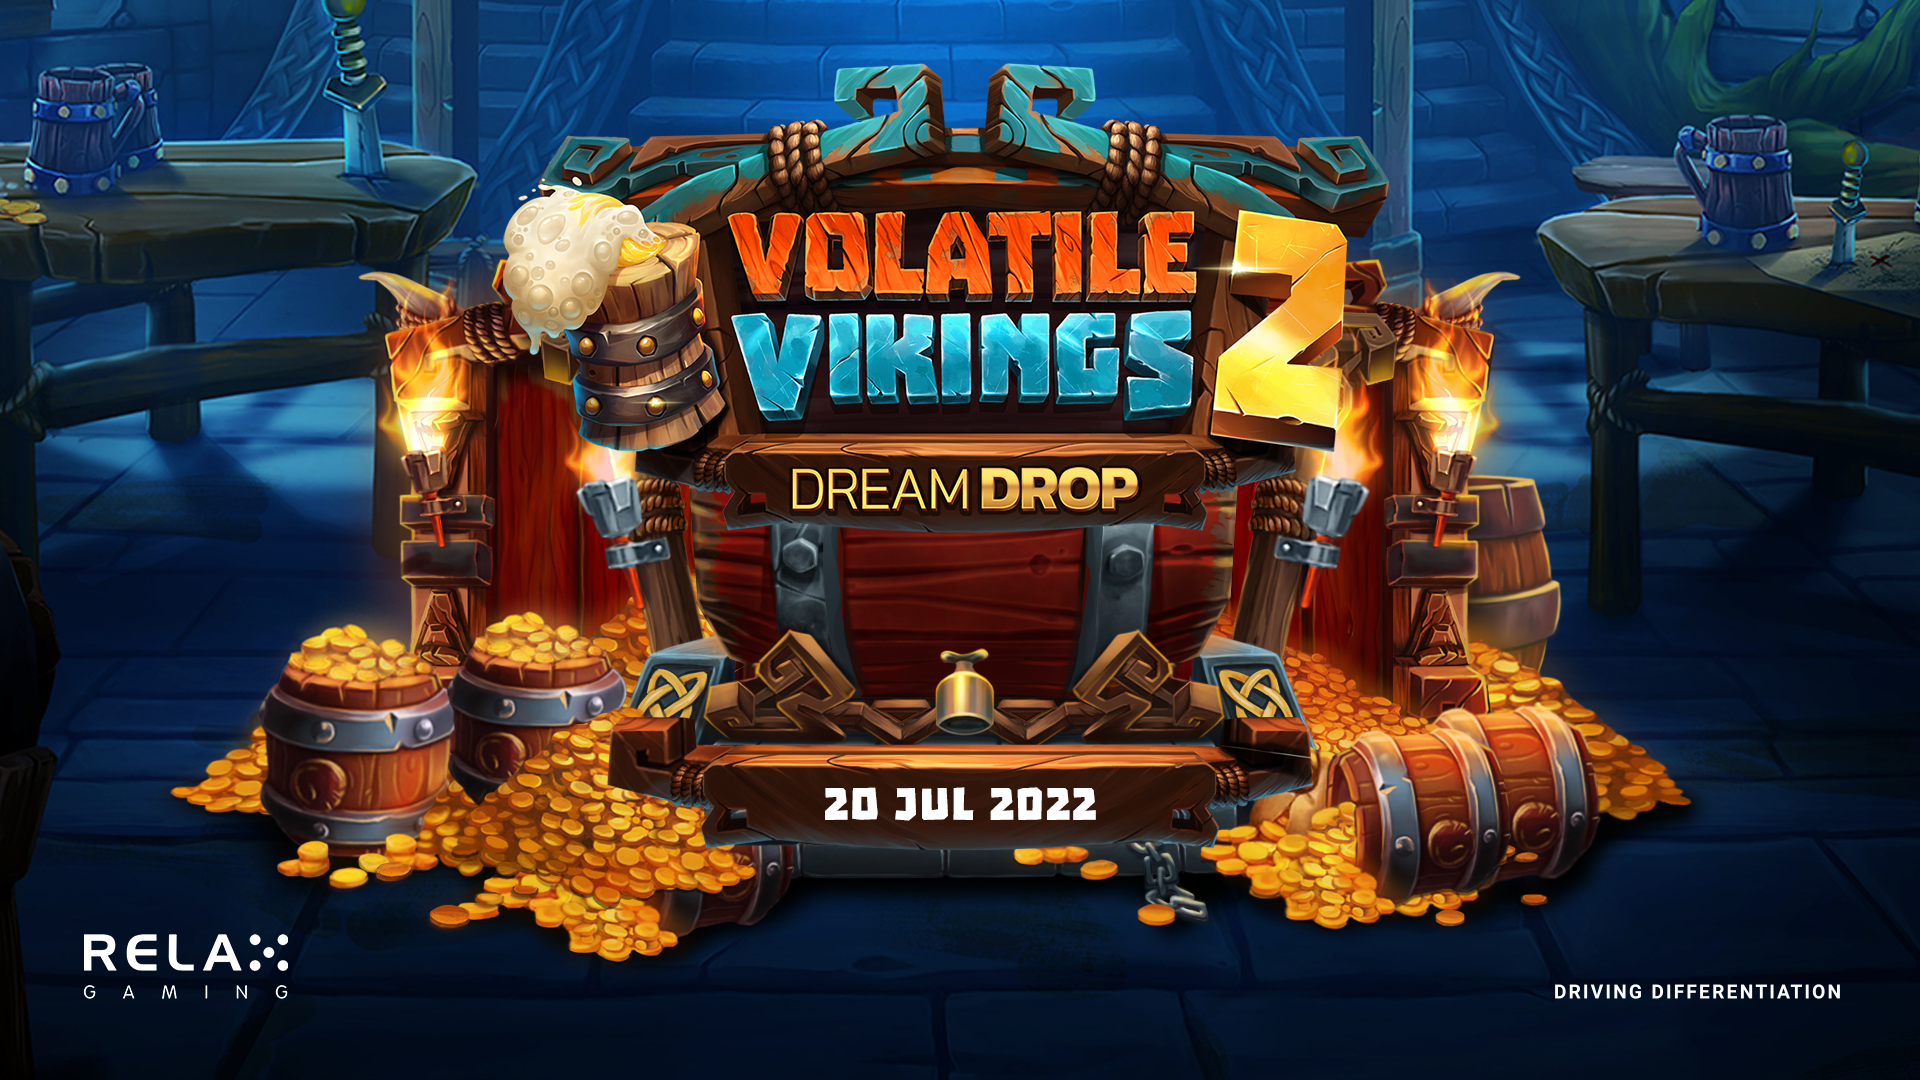 Relax Gaming continues to bolster jackpot line-up with Volatile Vikings 2 Dream Drop